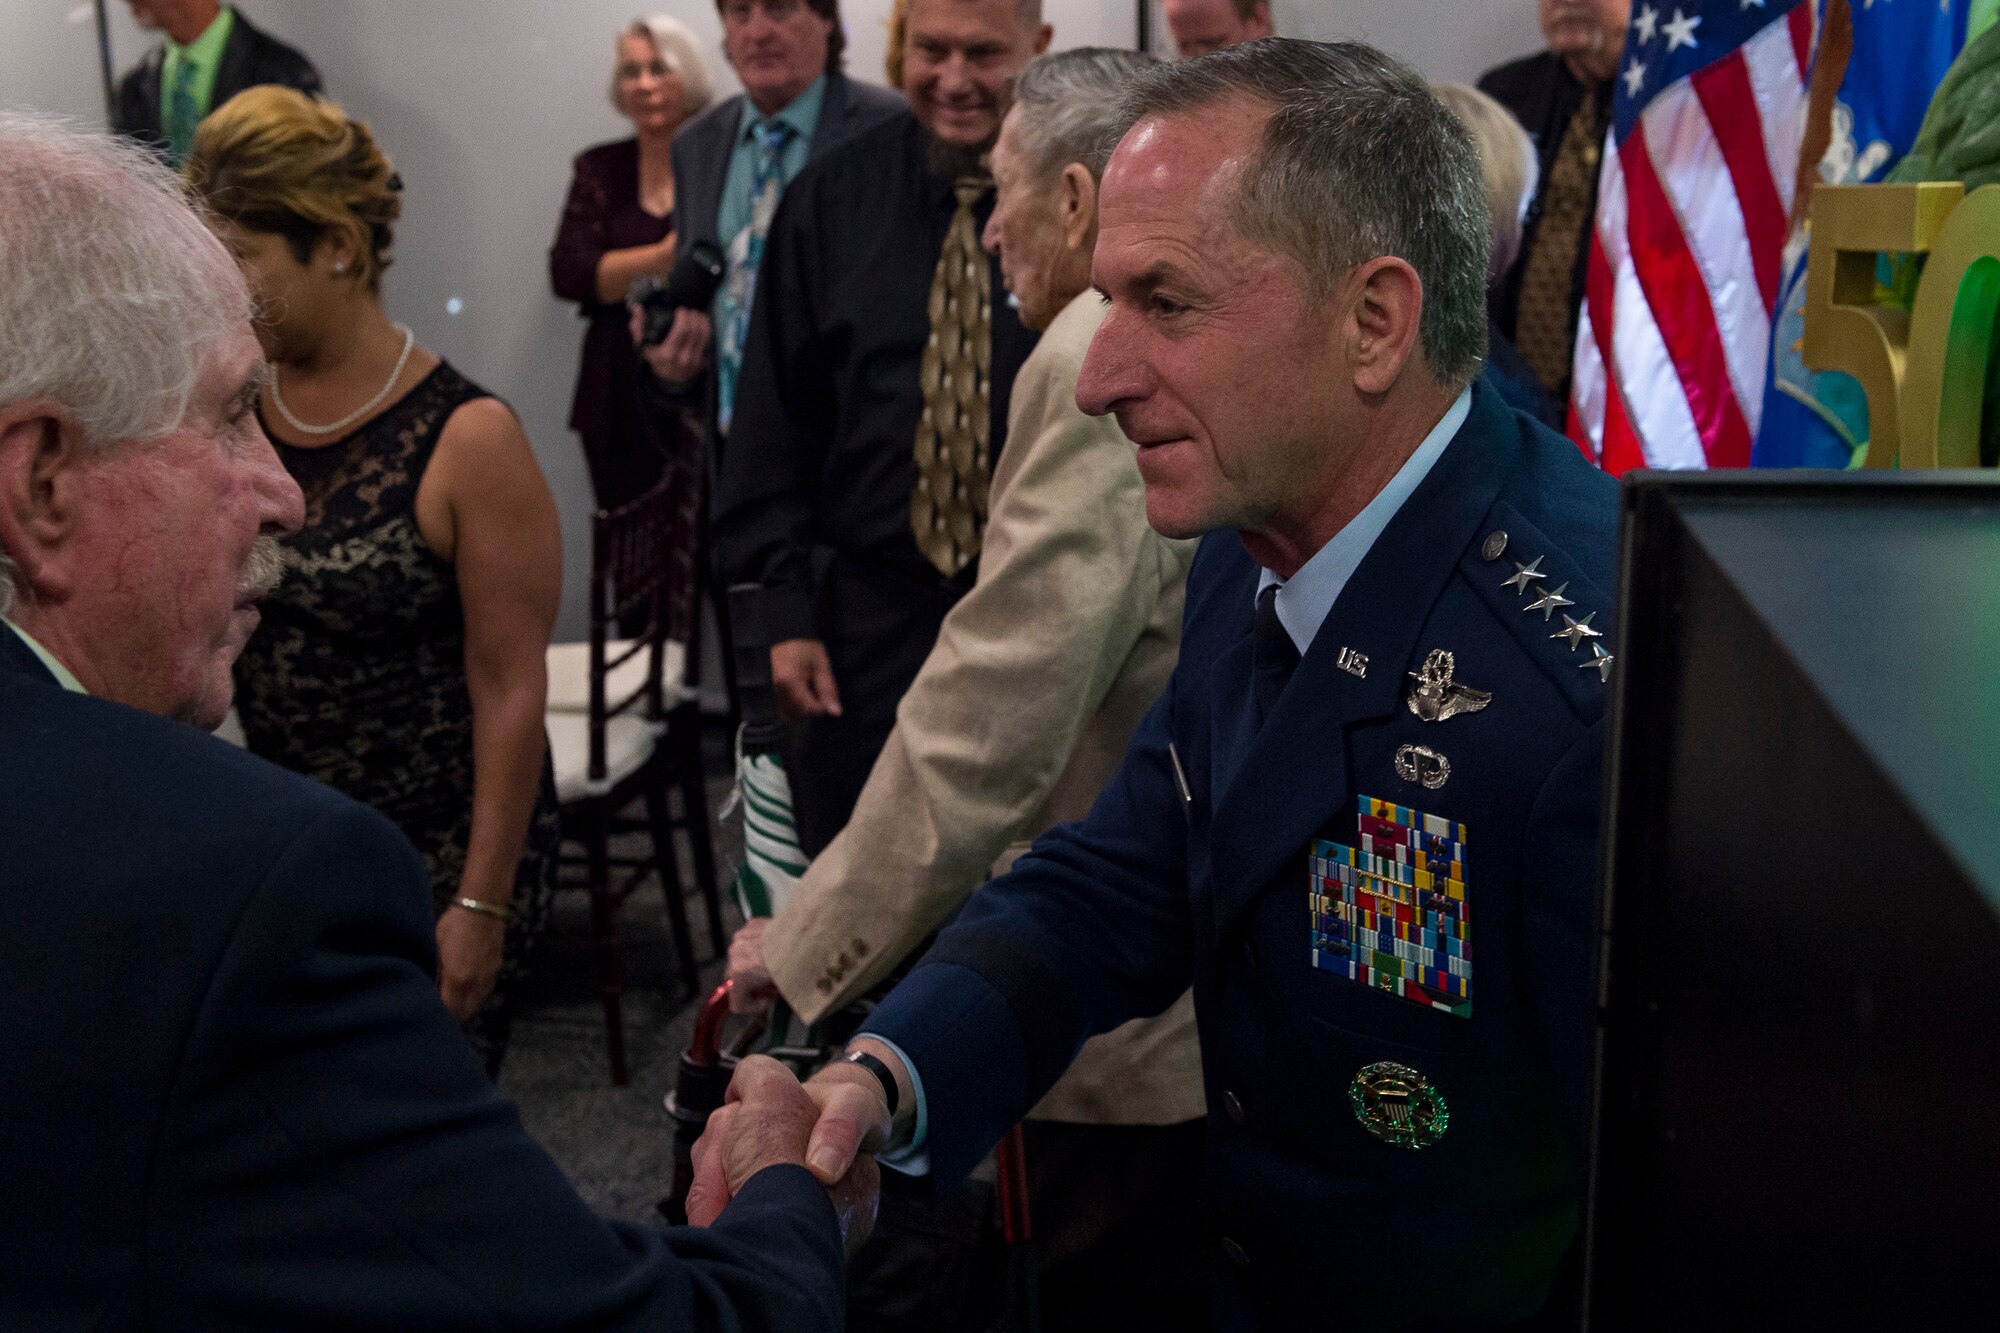 Air Force Chief of Staff Gen. David L. Goldfein, right, speaks with a member of the Jolly Green Association (JGA) during the banquet celebrating the 50th reunion of the JGA, May 4, 2019, in Fort Walton Beach, Fla. The JGA presented Airmen from the 41st Rescue Squadron (RQS) and the 48th RQS with the Rescue Mission of the Year award; the only non Air Force rescue award recognized by the Air Force. (U.S. Air Force Photo by Staff Sgt. Janiqua P. Robinson)